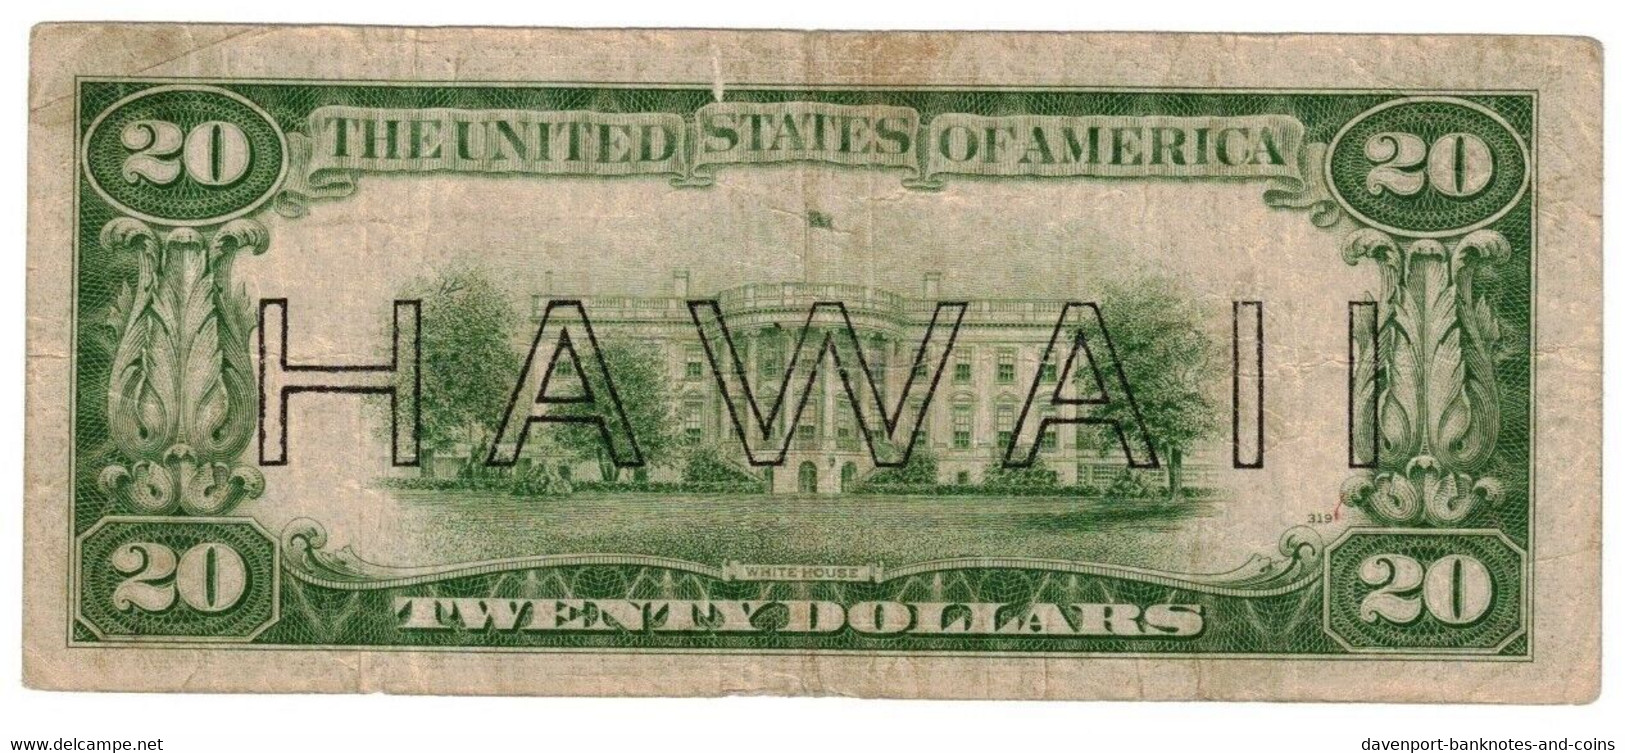 United States 20 Dollars 1934 F Federal Reserve "L-A" HAWAII Emergency Issue - Hawaii, North Africa (1942)